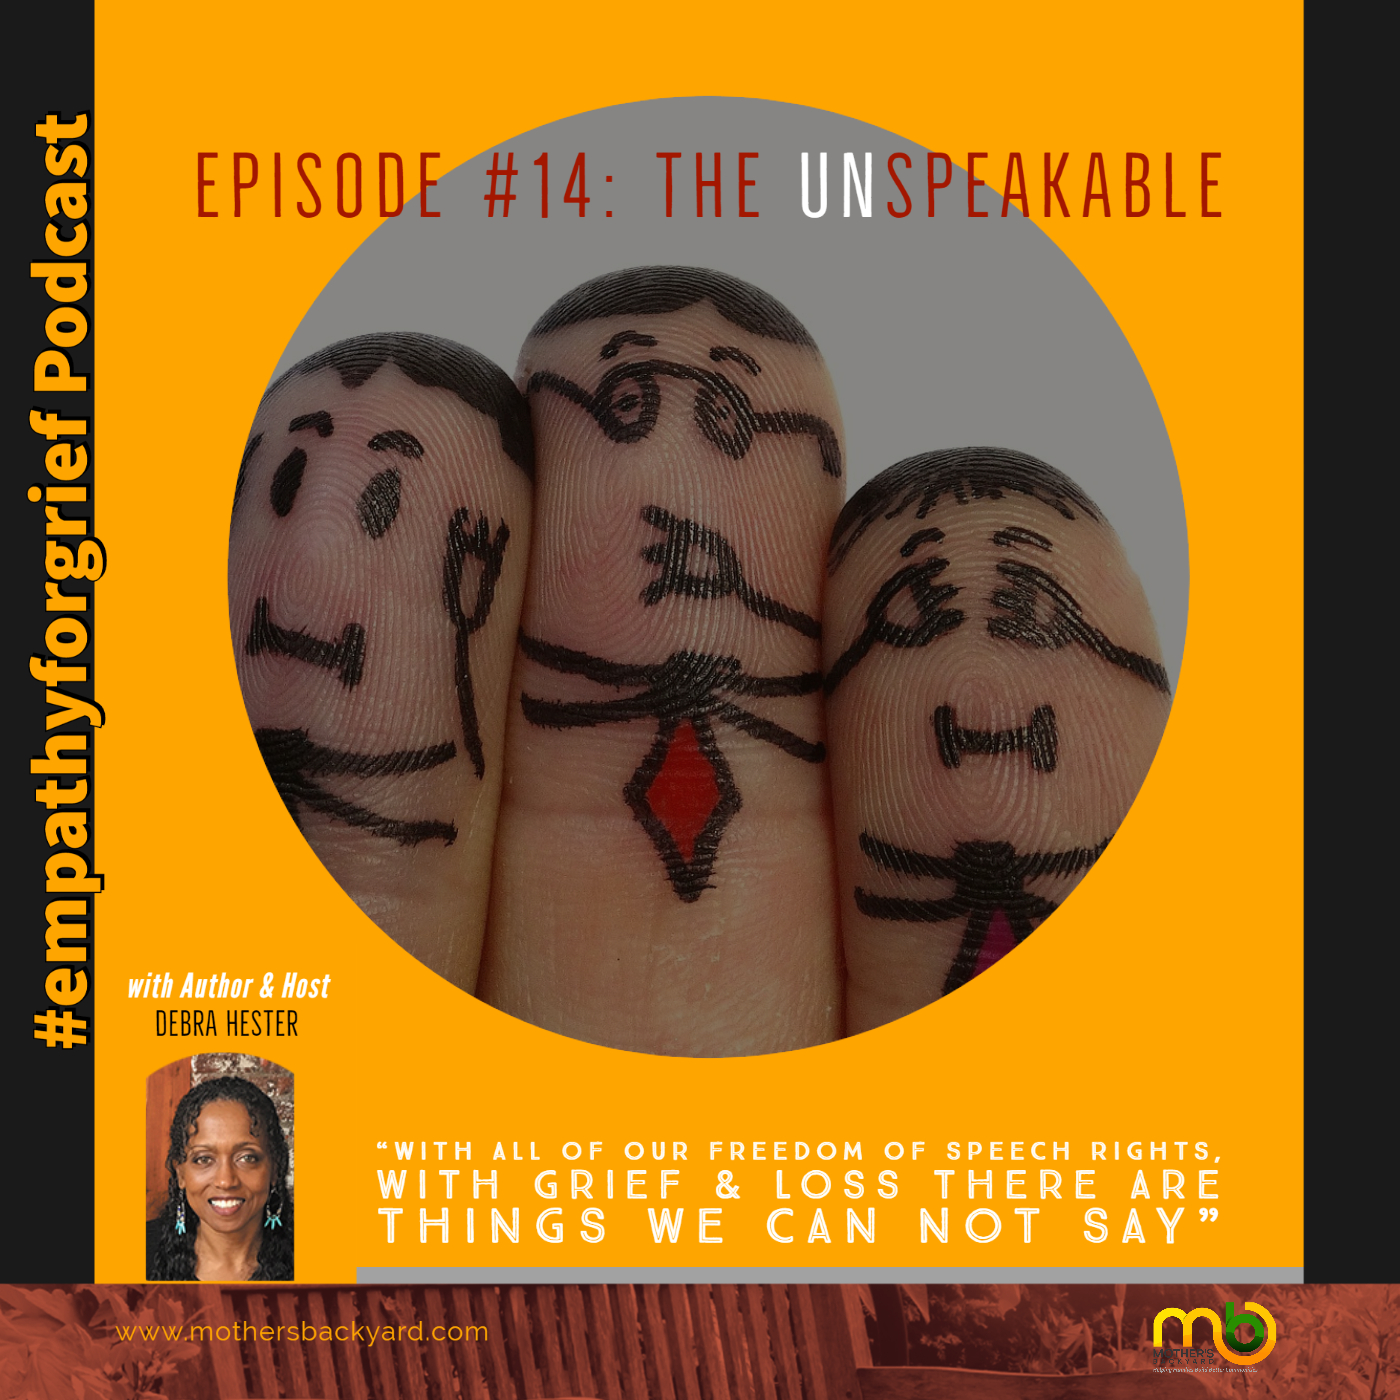 #empathyforgrief and loss cover - Episode 14 - The Unspeakables - Mother's Backyard